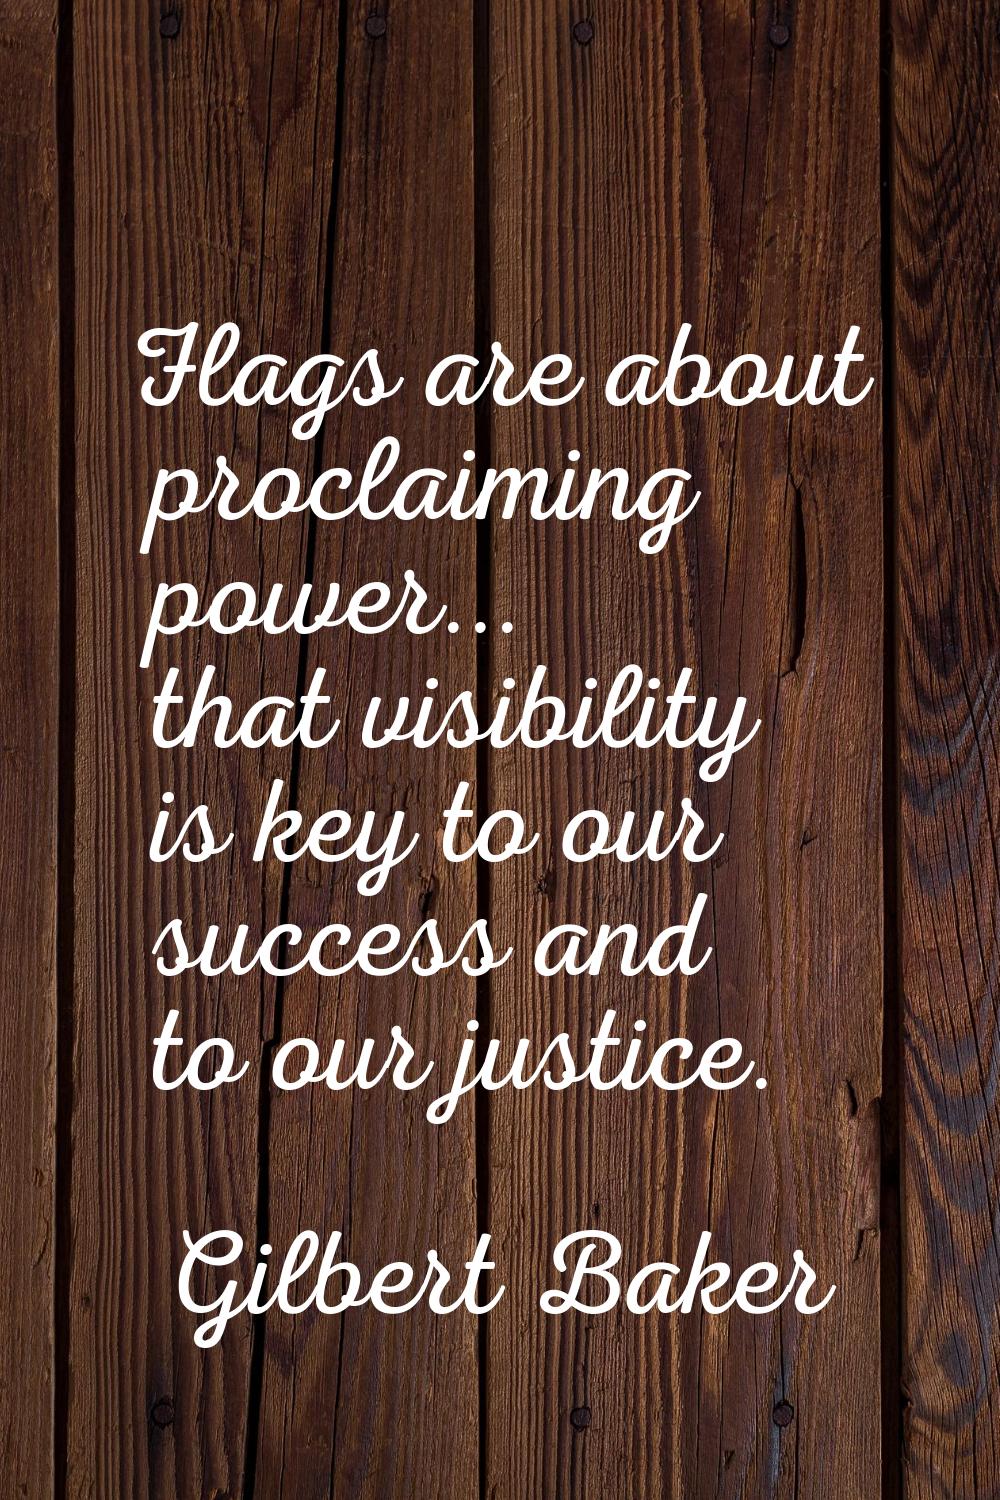 Flags are about proclaiming power... that visibility is key to our success and to our justice.